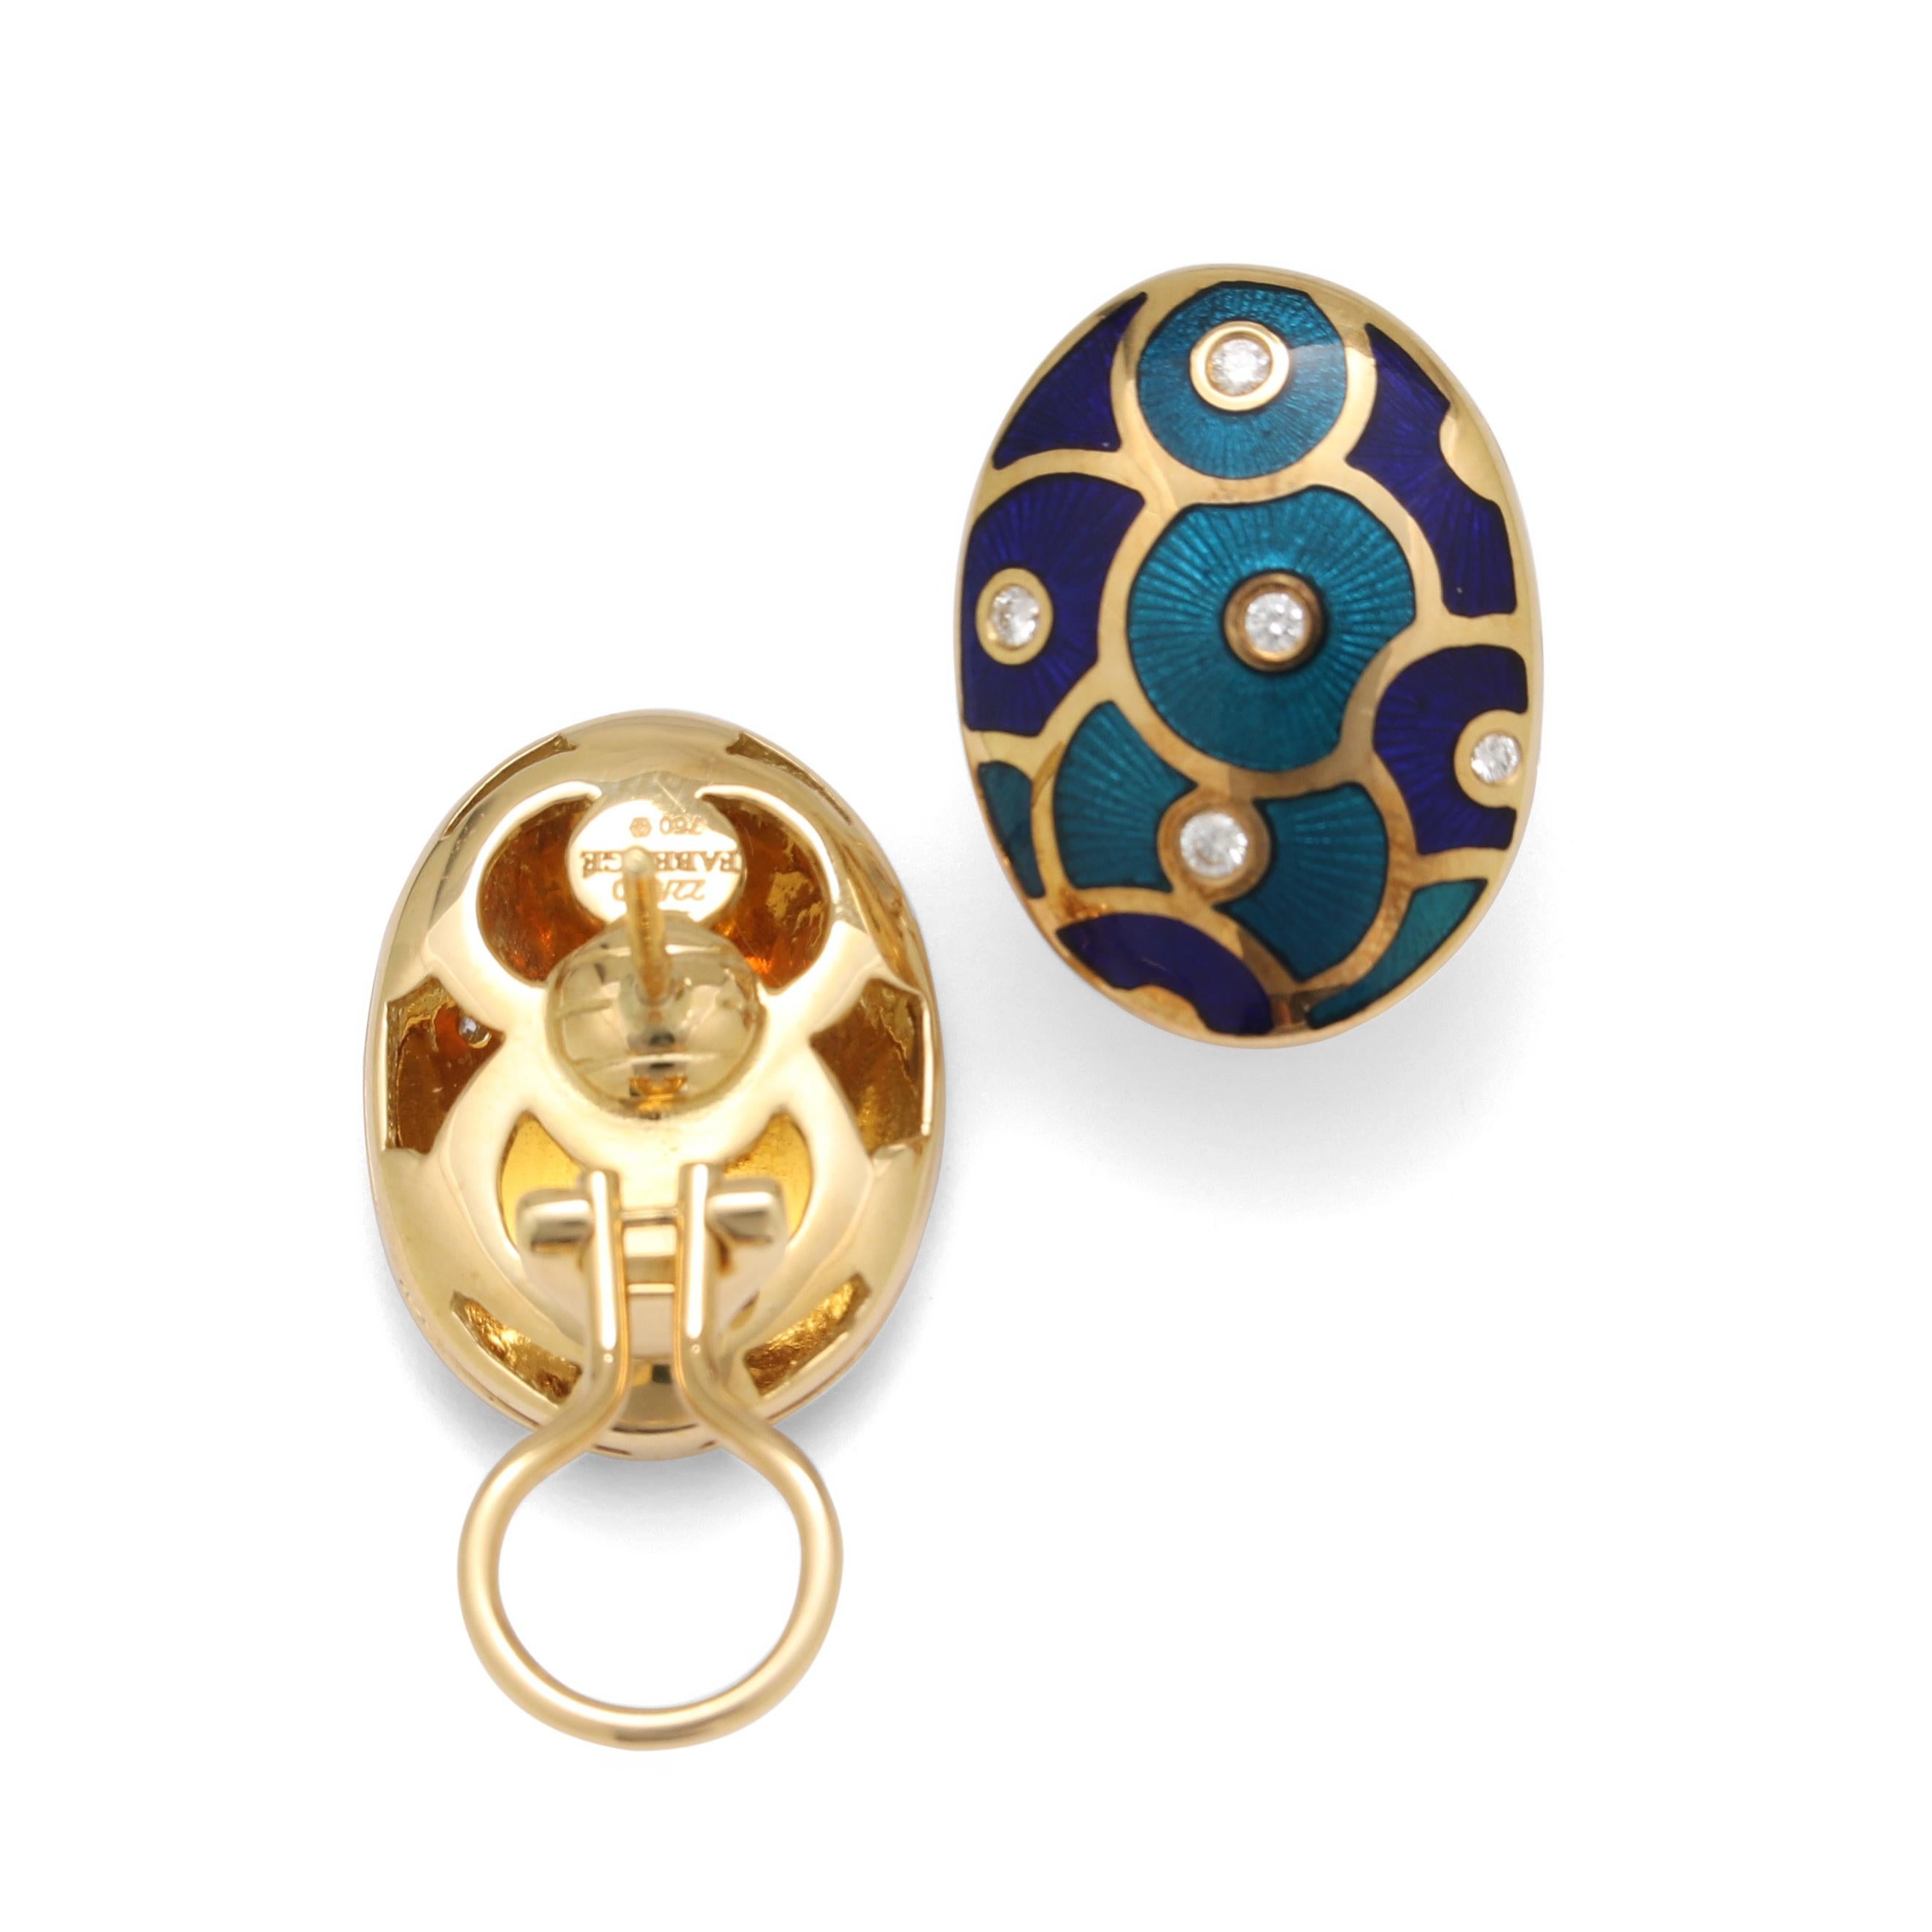 Fabergé Paraplui  18k gold enamel earrings - diamonds total 0,150 ct

For two decades (1989 to 2009) the renowned German jewellery firm VICTOR MAYER was au-thorised to create exquisite Fabergé jewels and objects of art under worldwide exclusive